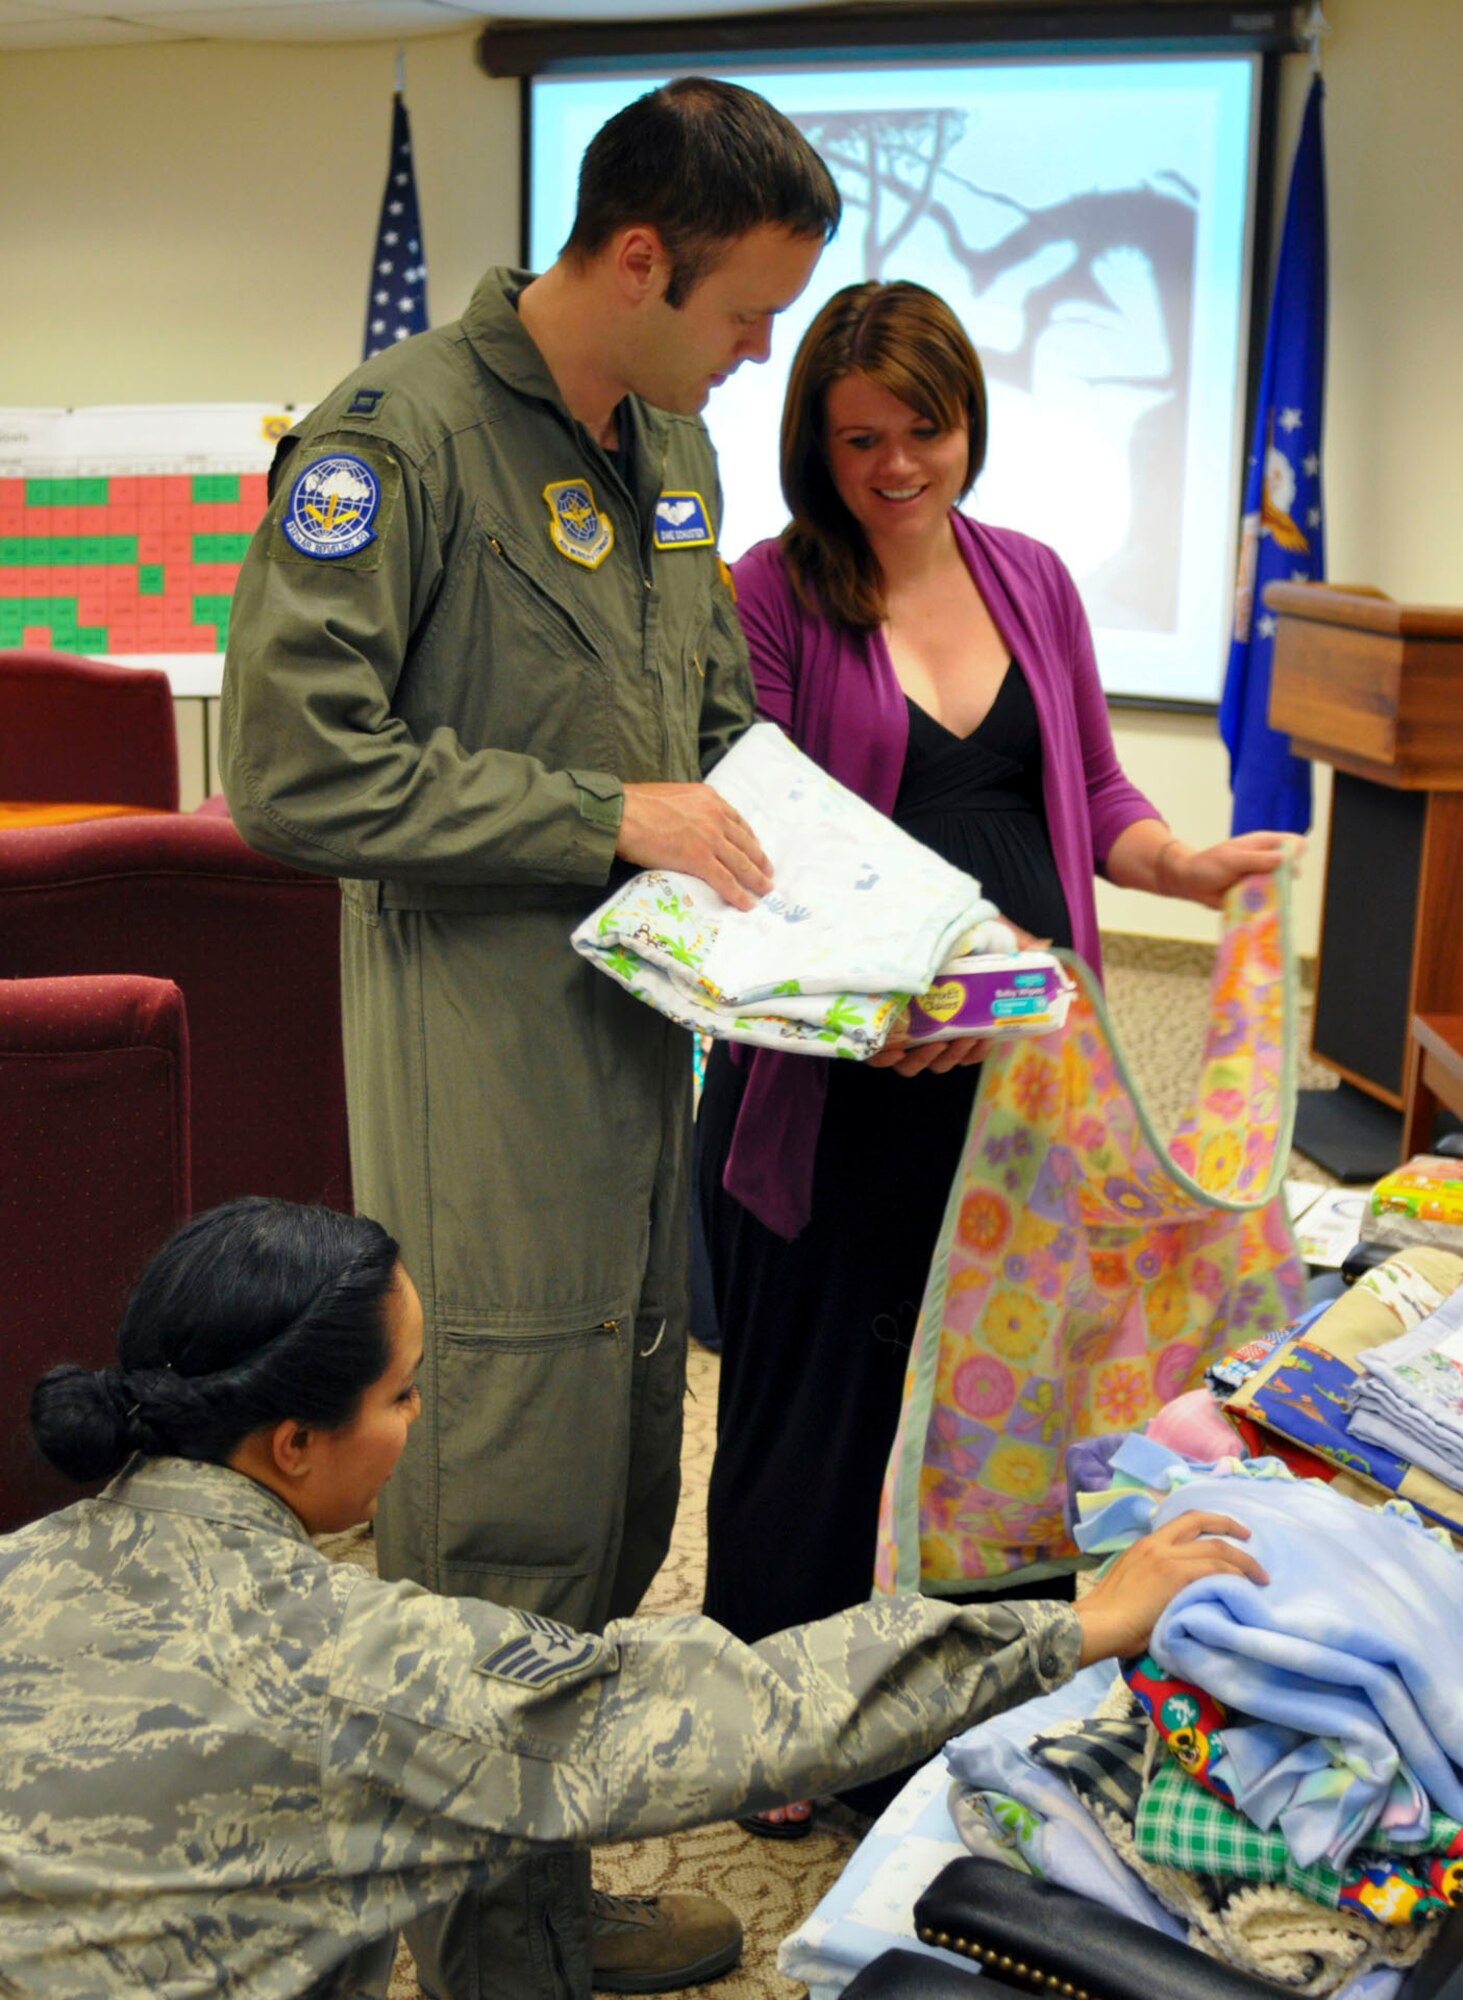 Capt. Dave Shuster, a KC-135 Stratotanker pilot with the 912th Air Refueling Squadron, and his wife, Annie, select a baby quilt after the Bundles for Babies course at March Air Reserve Base, Calif., June 7, 2011. Bundles for Babies is an Air Force Aid Society sponsored course that helps expectant parents be prepared for the costs of raising a child. The Schusters are expecting their first child. (U.S. Air Force photo/Megan Just)